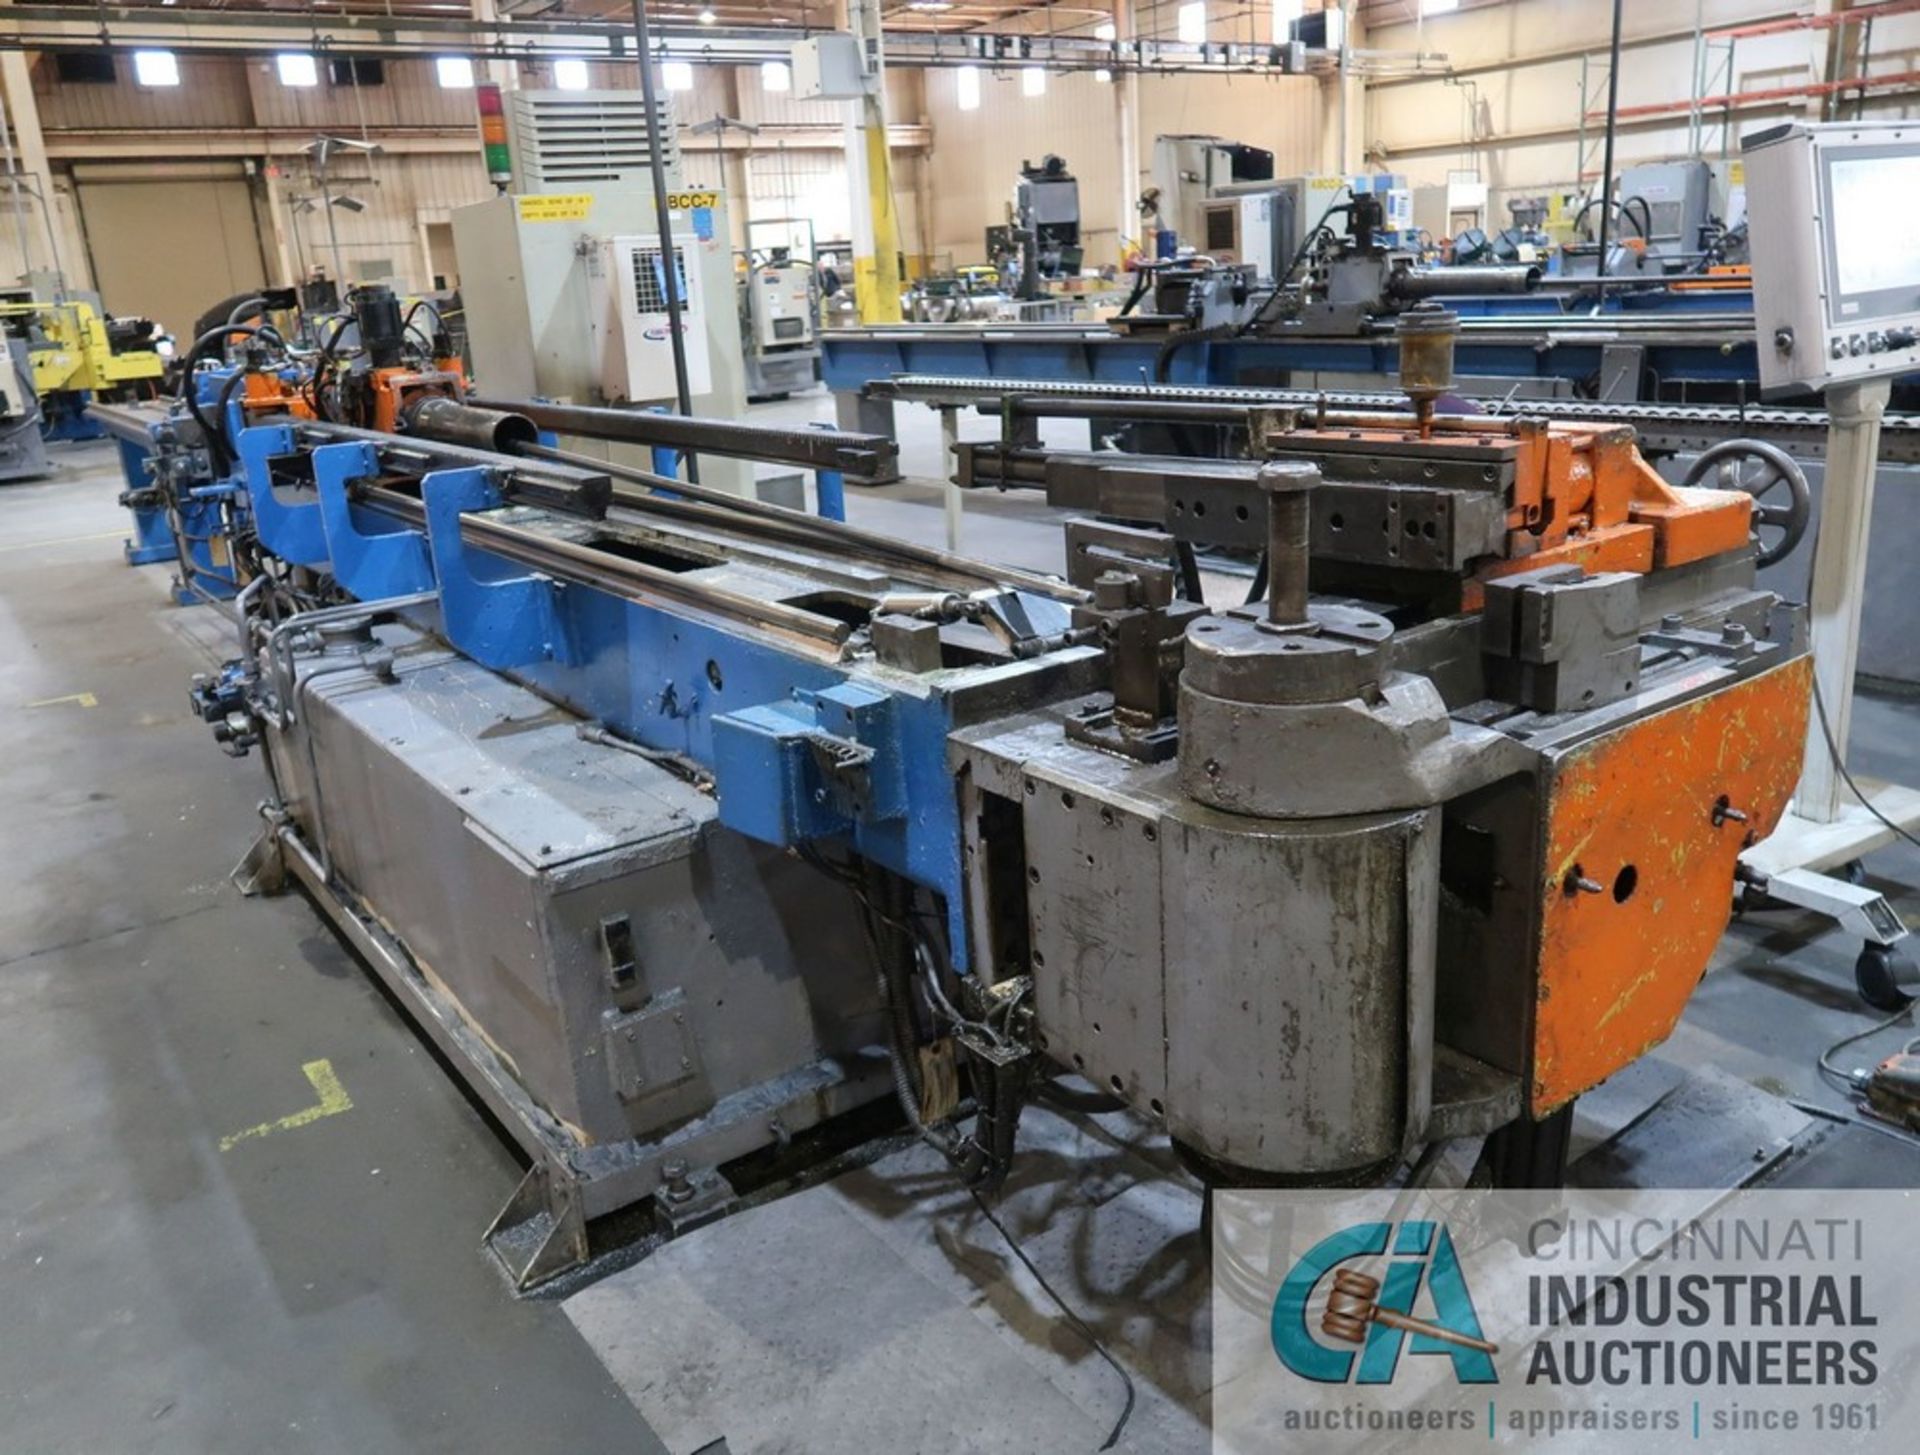 3" ADDISON MODEL DB76-TB TRAVELING BOOST CNC HYDRAULIC TUBE BENDER; S/N 10035, ASSET NO. ABCC-7, - Image 2 of 17